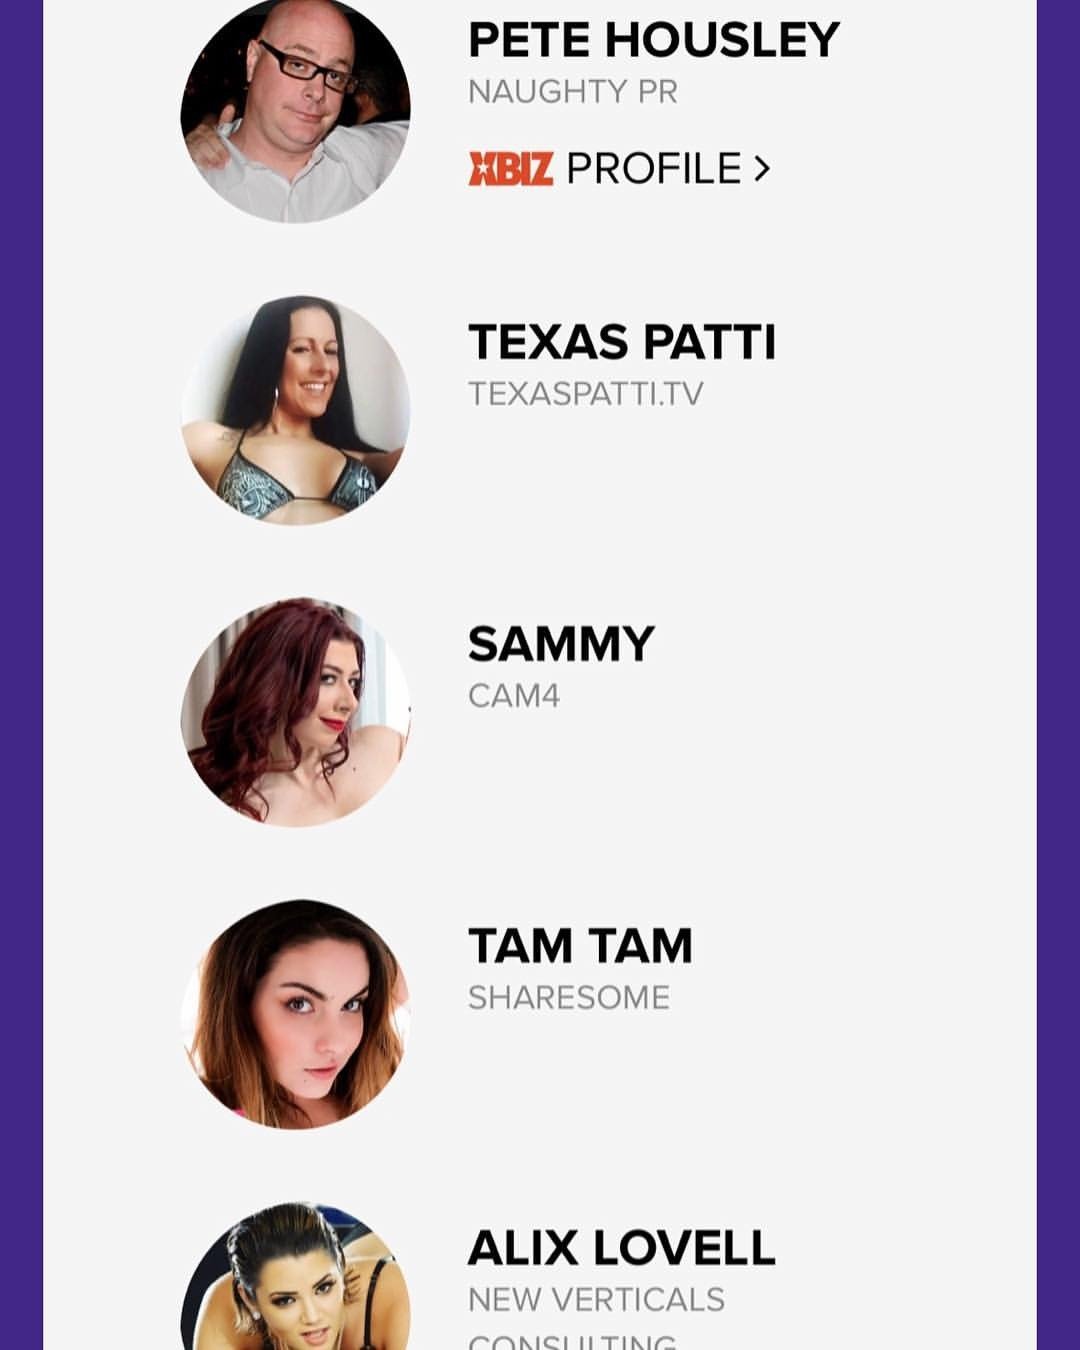 Watch the Photo by SammyStrips with the username @SammyStrips, posted on January 15, 2019 and the text says 'Come check out the social media panel I’ll be speaking on in one hour at @xbizofficial LA #xbiz #xbizla
https://www.instagram.com/p/Bsq1QC5l-Ya/?utm_source=ig_tumblr_share&amp;igshid=t8ssdwgptoq0 #xbiz  #xbizla'